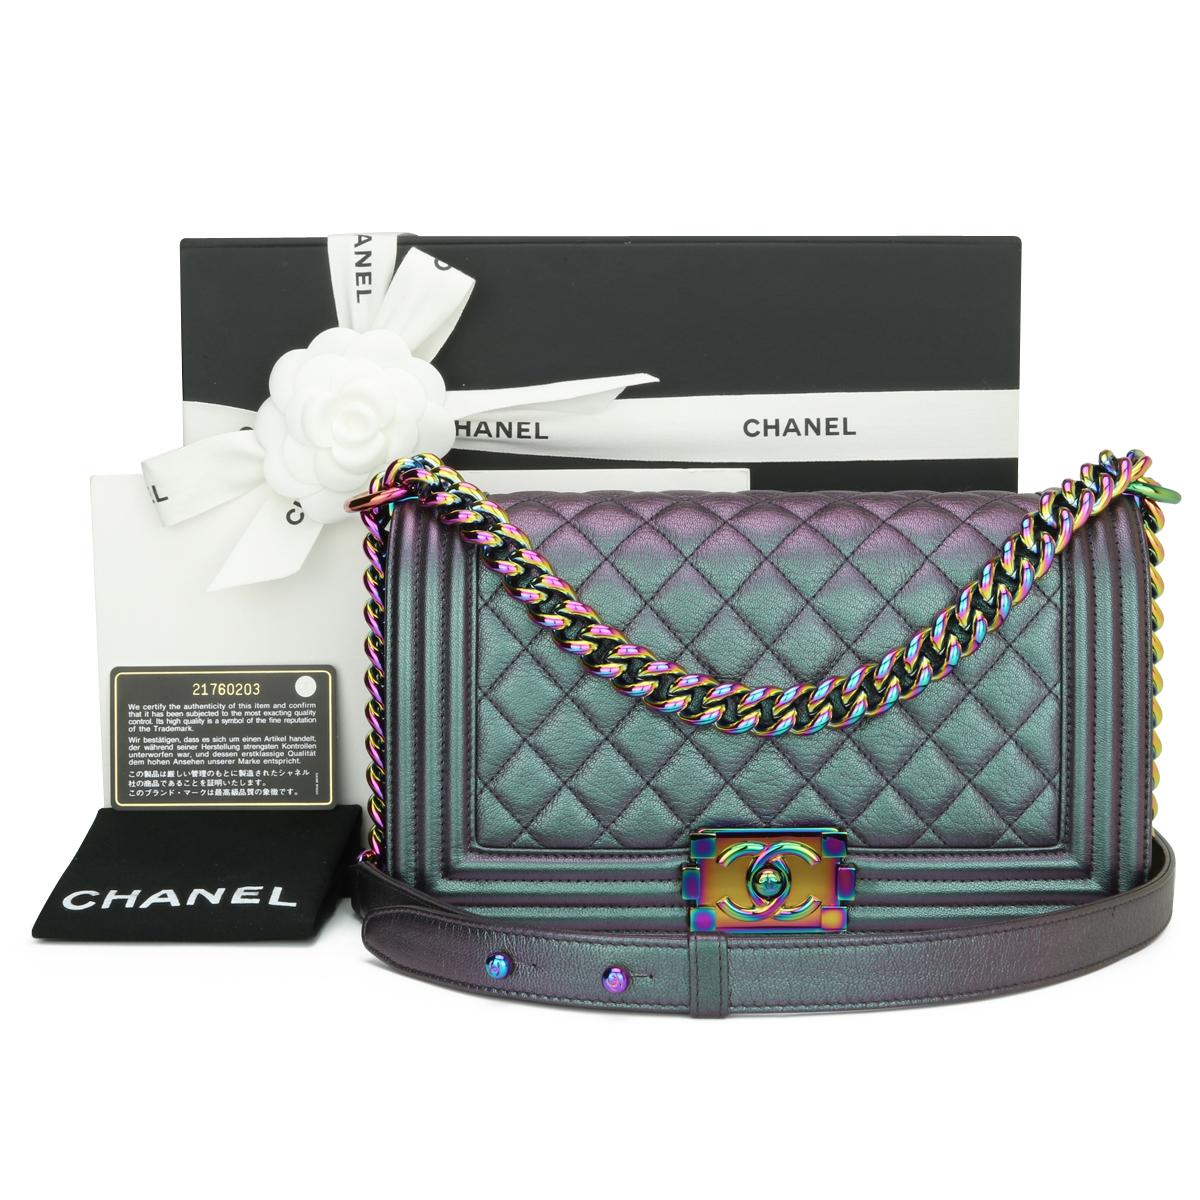 CHANEL Medium Boy Bag Quilted Iridescent Purple Goatskin with Rainbow Hardware 2016.

This stunning bag is still in excellent condition, the bag still holds its original shape, and the hardware is still very clean and shiny.

It is a truly stunning